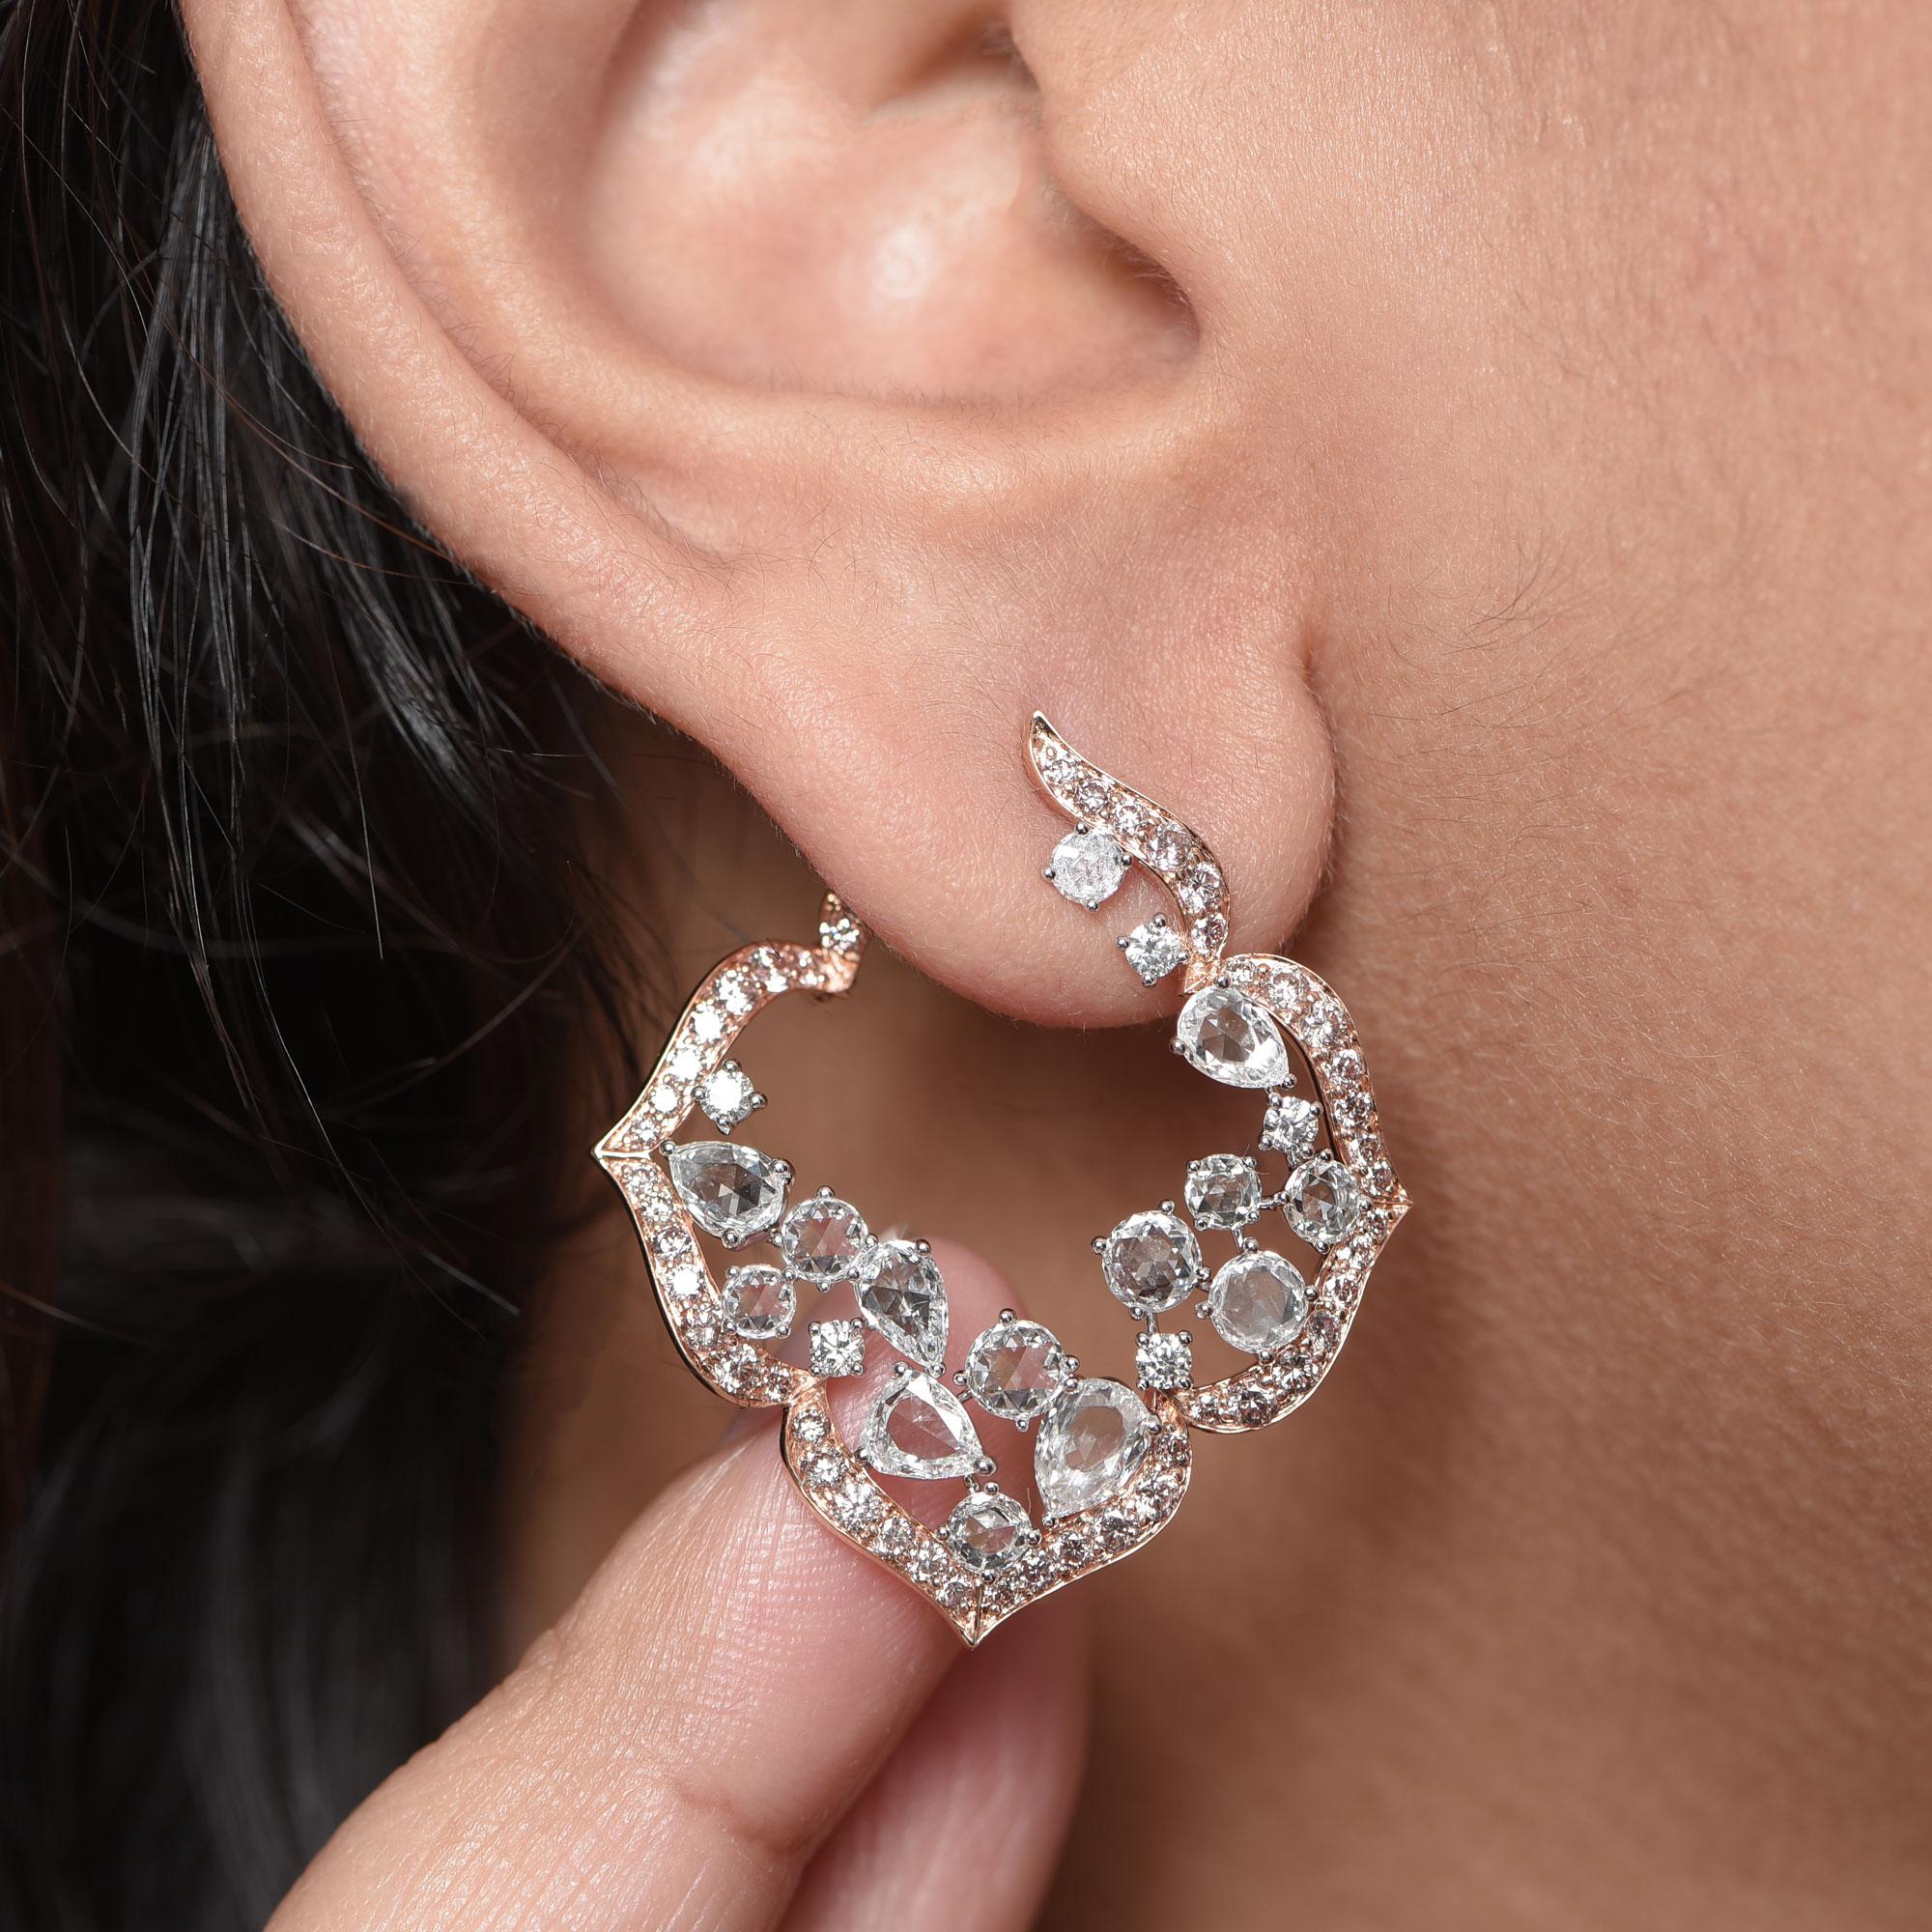 Inspired by the grand Indian havelis (royal abode) of yesteryear, these contemporary inside out earrings are crafted in 18 KT rose and are studded with 140 diamonds including natural pink diamonds, brilliant and rose cut diamonds. 

A spread of rose